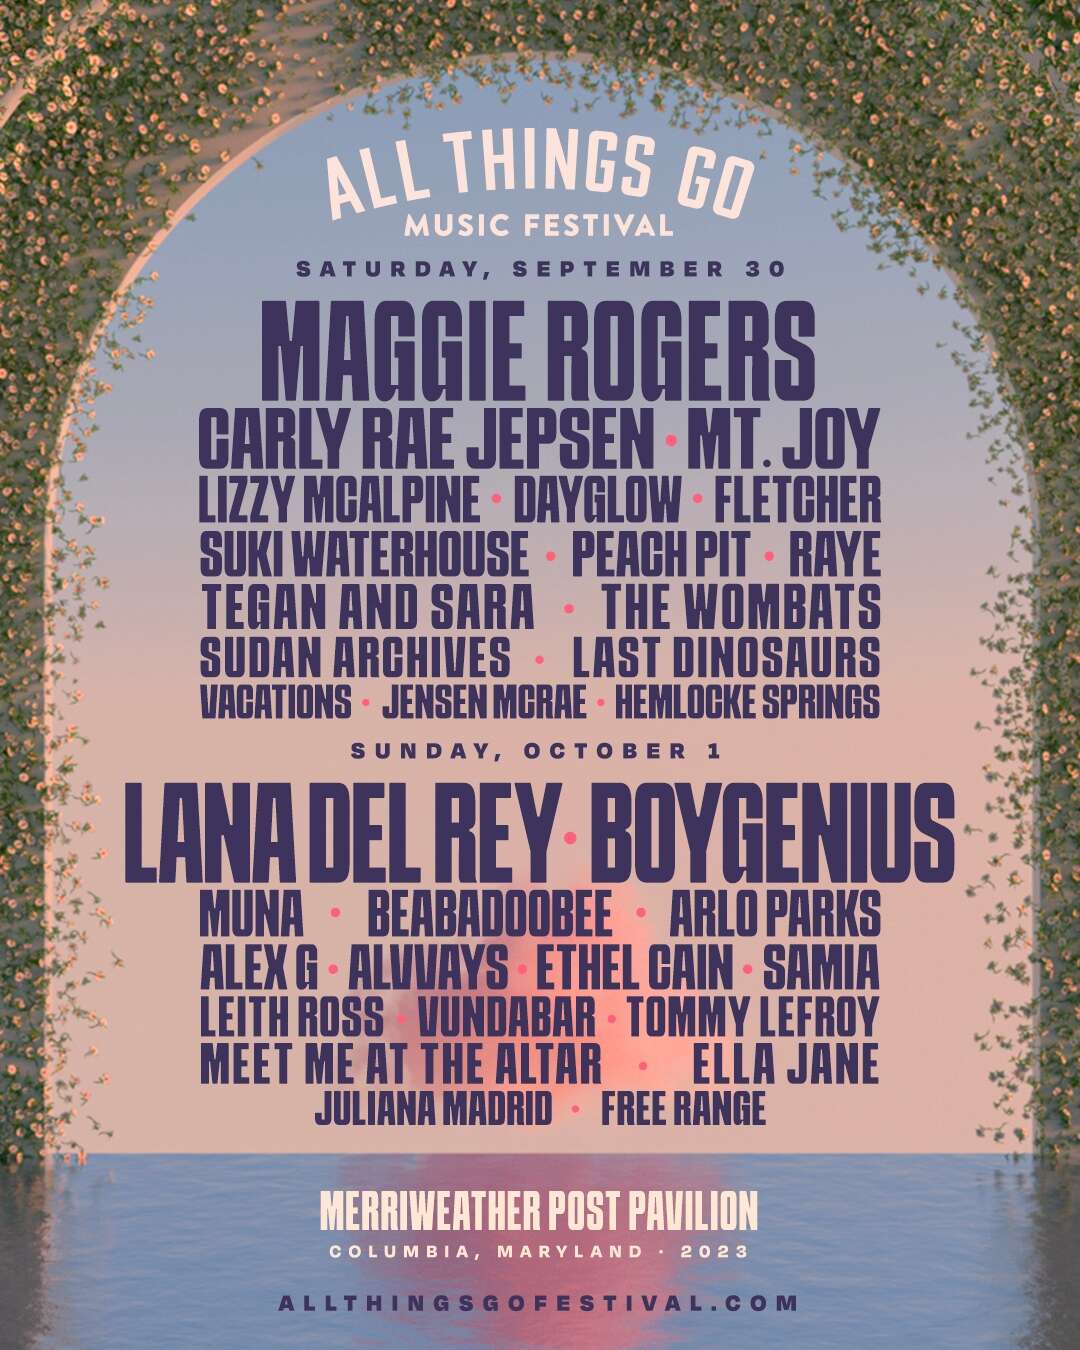 The festival lineup poster for All Things Go, a music festival in Columbia, Maryland.